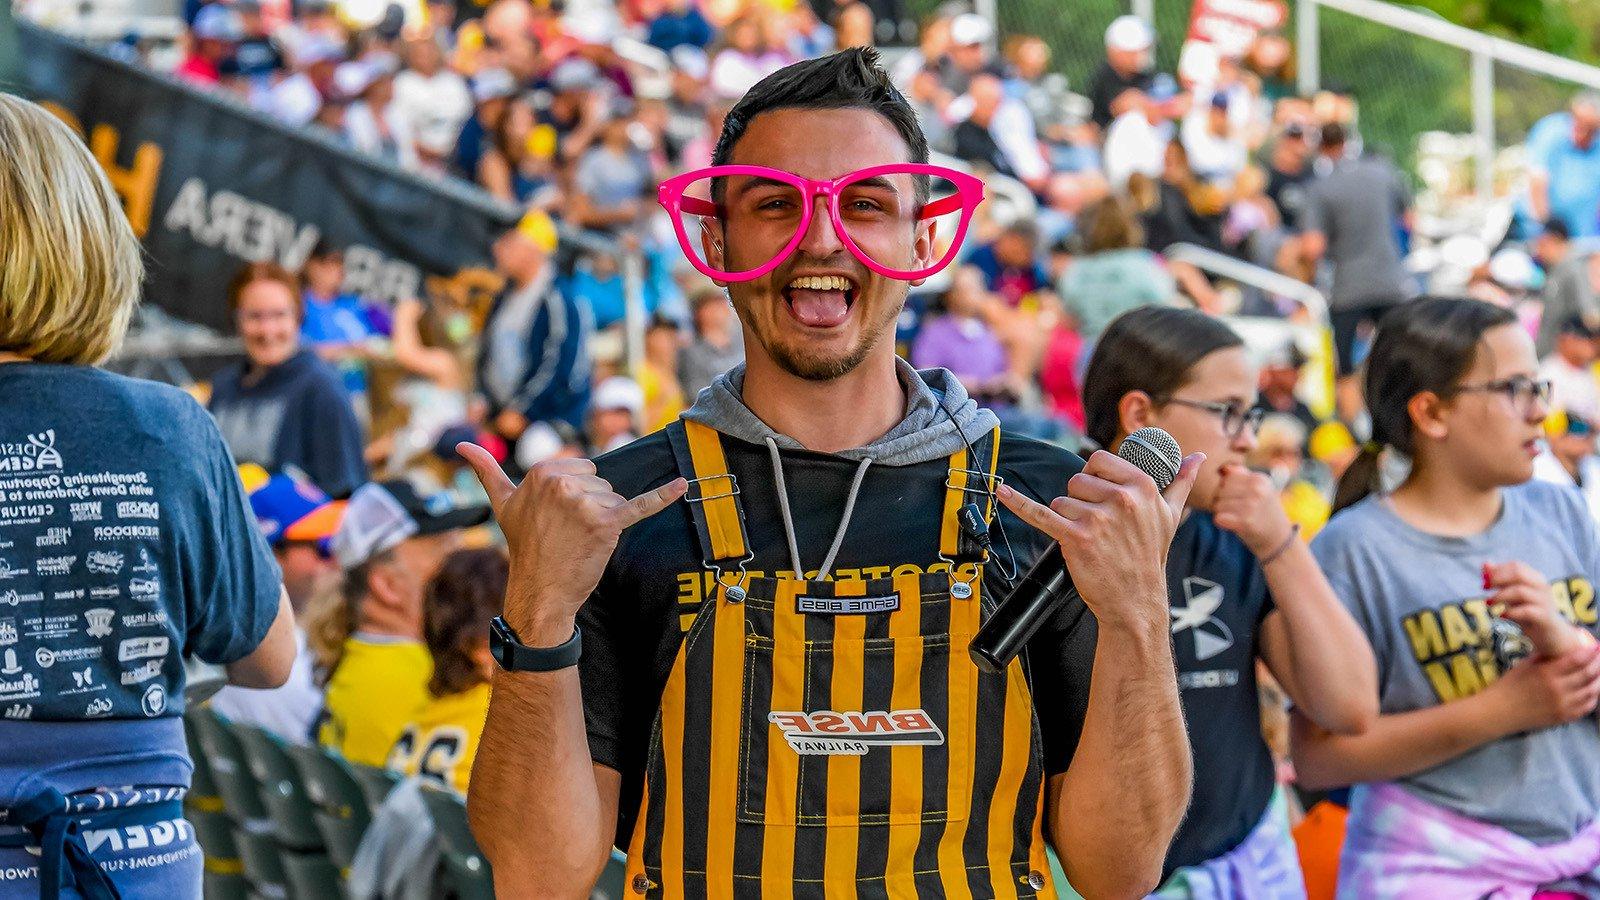 A man standing and looking excited while holding a microphone in oversized pink glasses and yellow and black striped overalls in the foreground of a large crowd at a stadium.